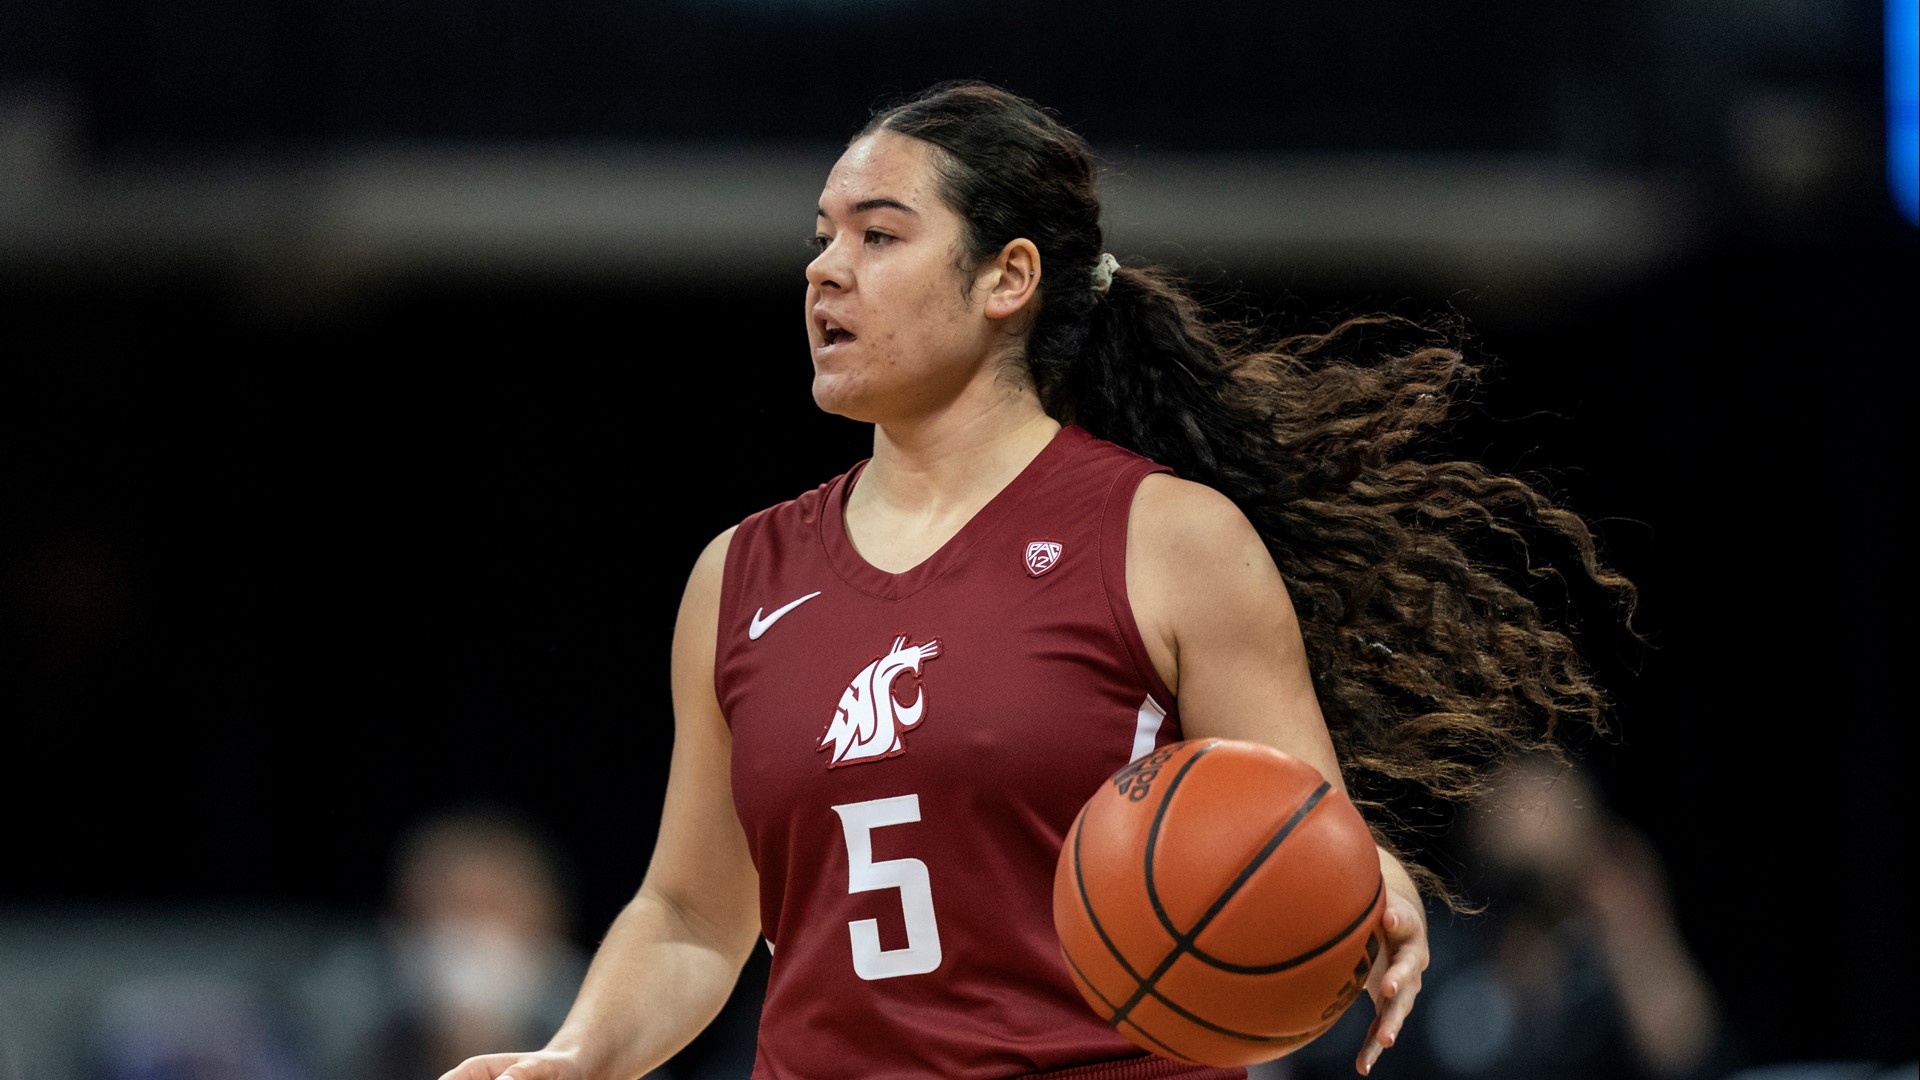 Leger-Walker has had one of the best freshman campaigns of any WSU women's basketball player ever.